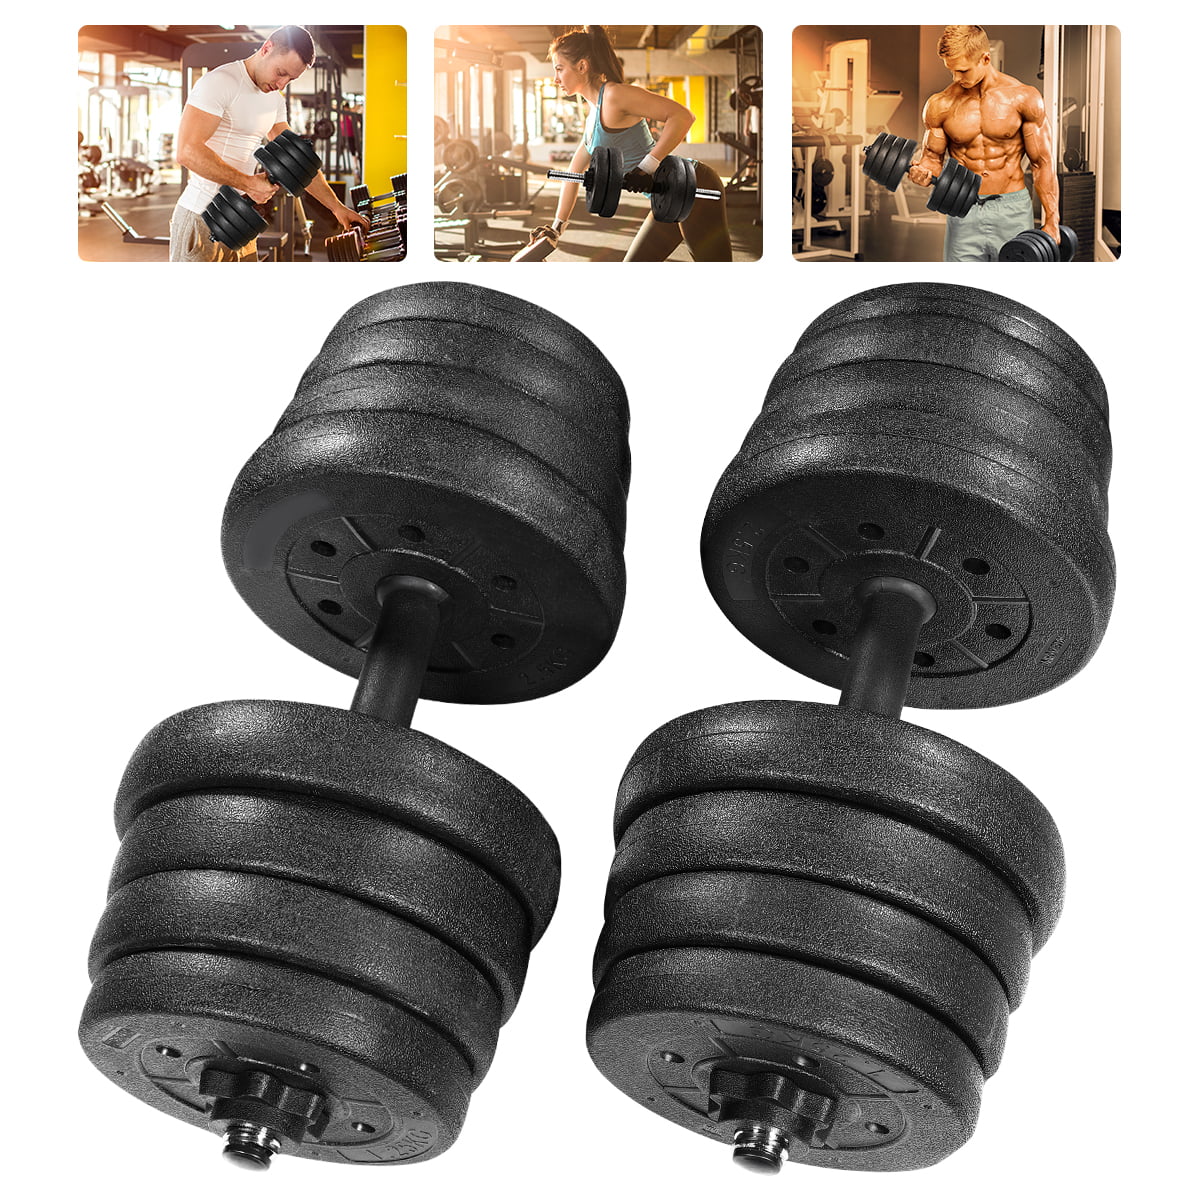 ND 30KG DUMBELLS PAIR OF GYM WEIGHTS BARBELL DUMBBELL BODY BUILDING WEIGHT SET 